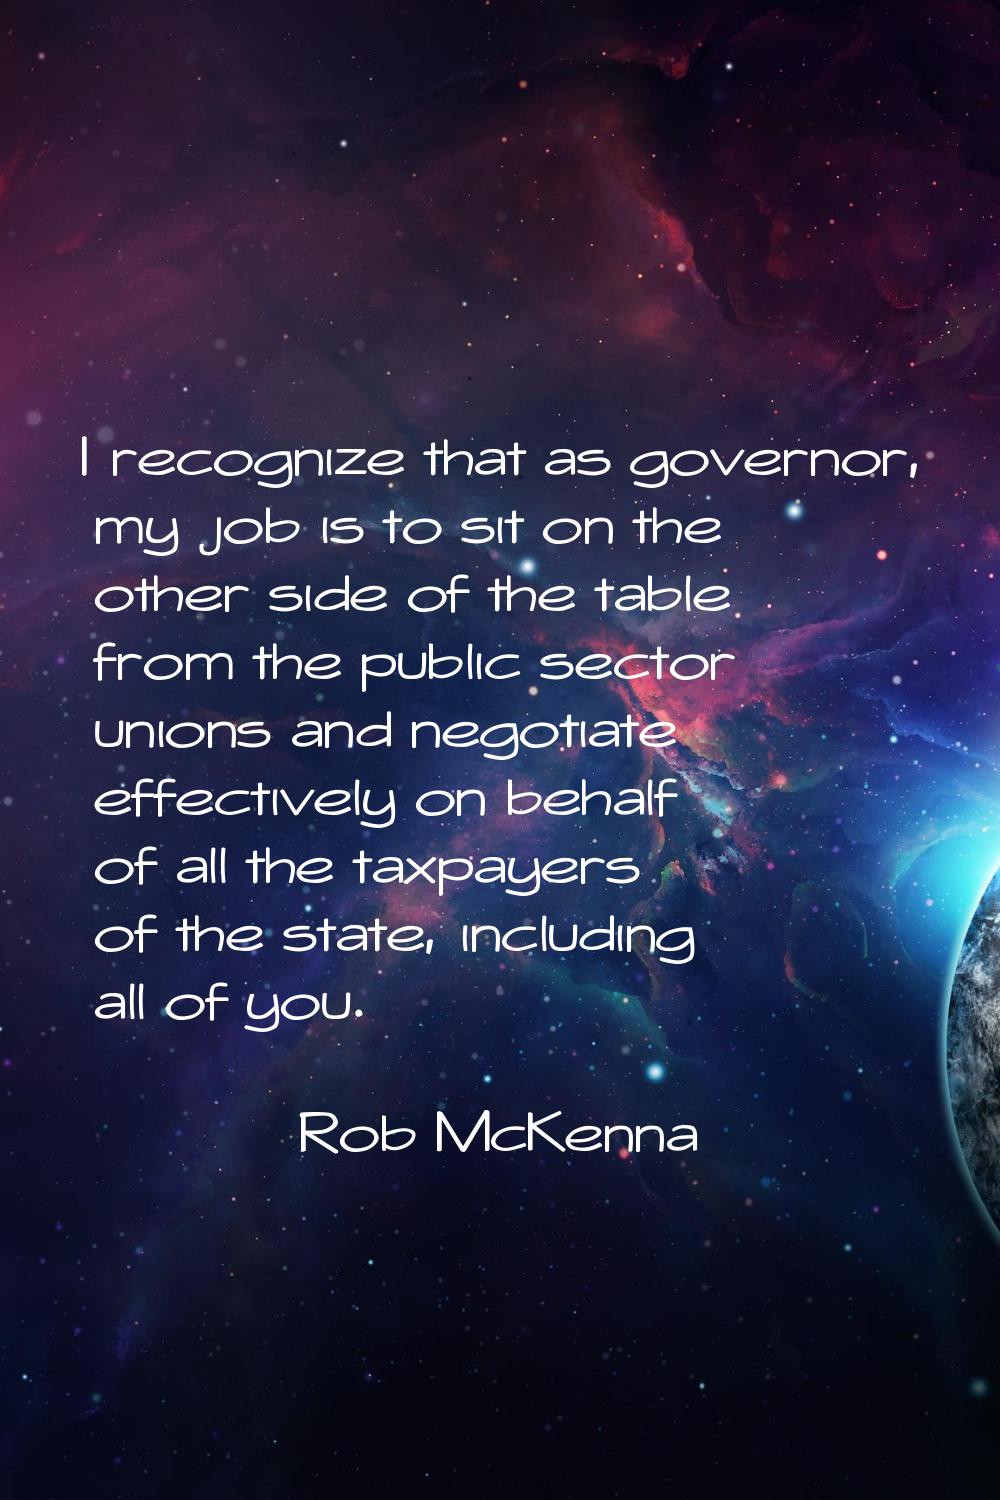 I recognize that as governor, my job is to sit on the other side of the table from the public secto